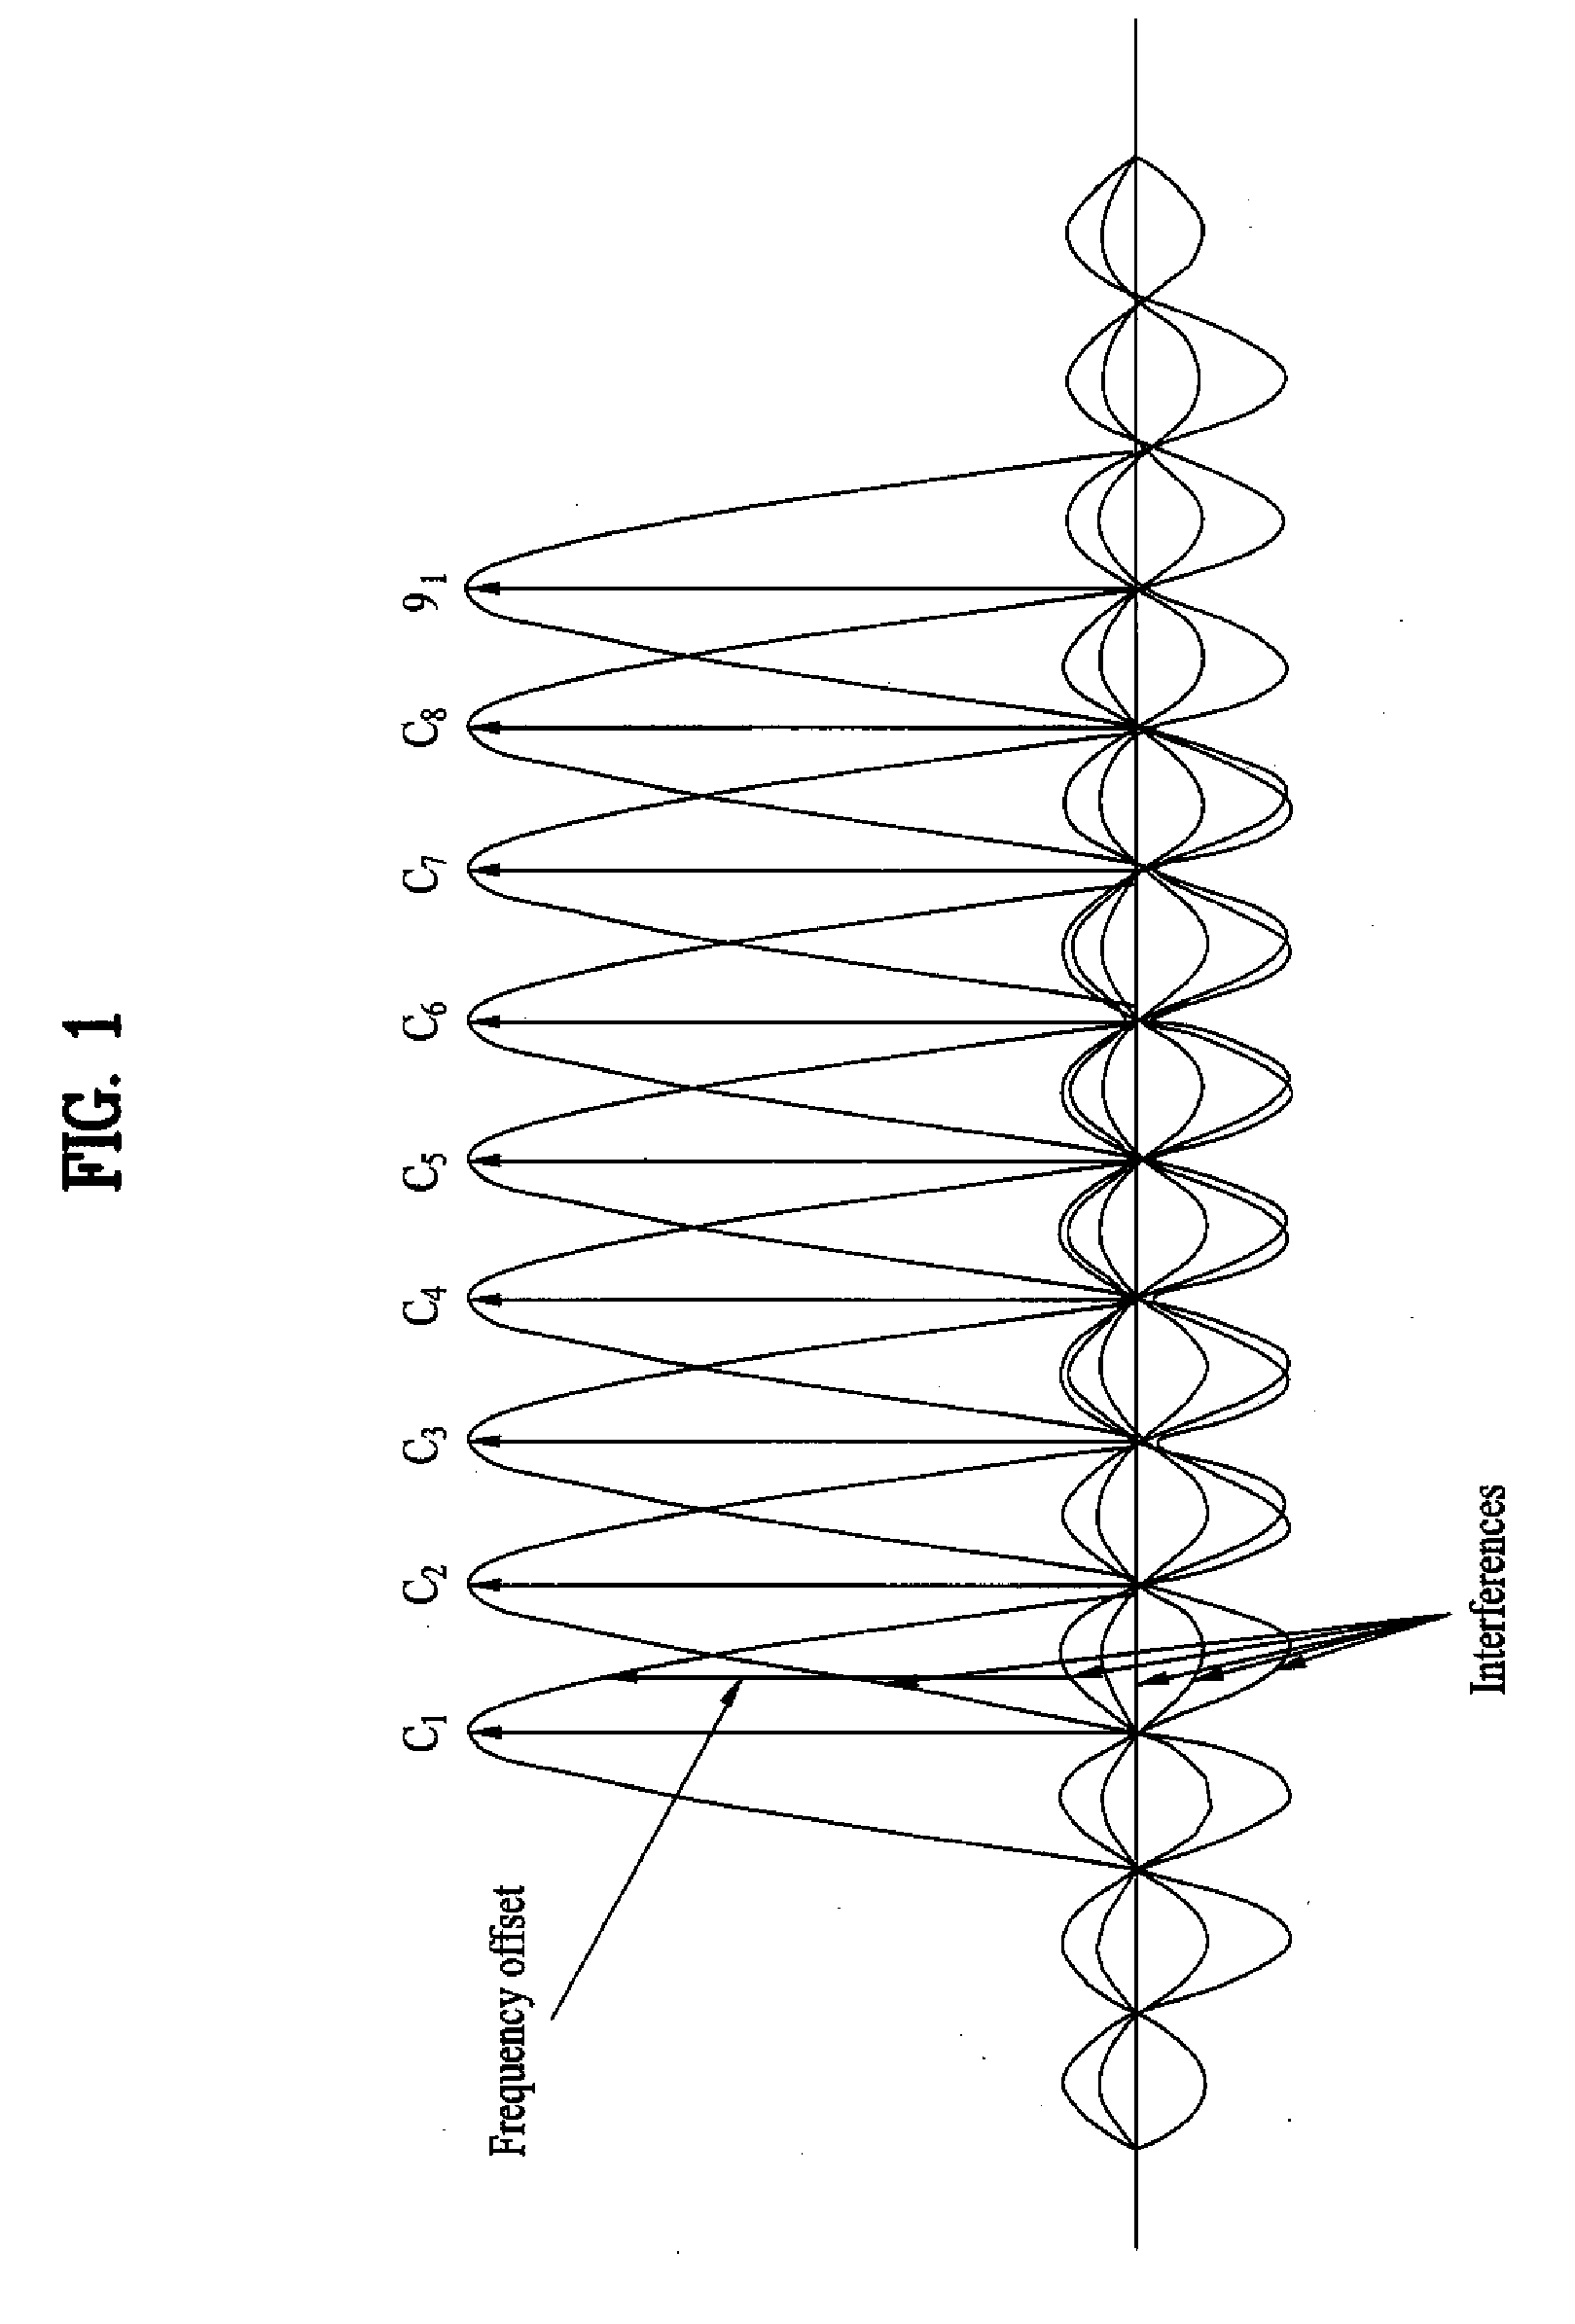 Method for setting cyclic shift considering frequency offset